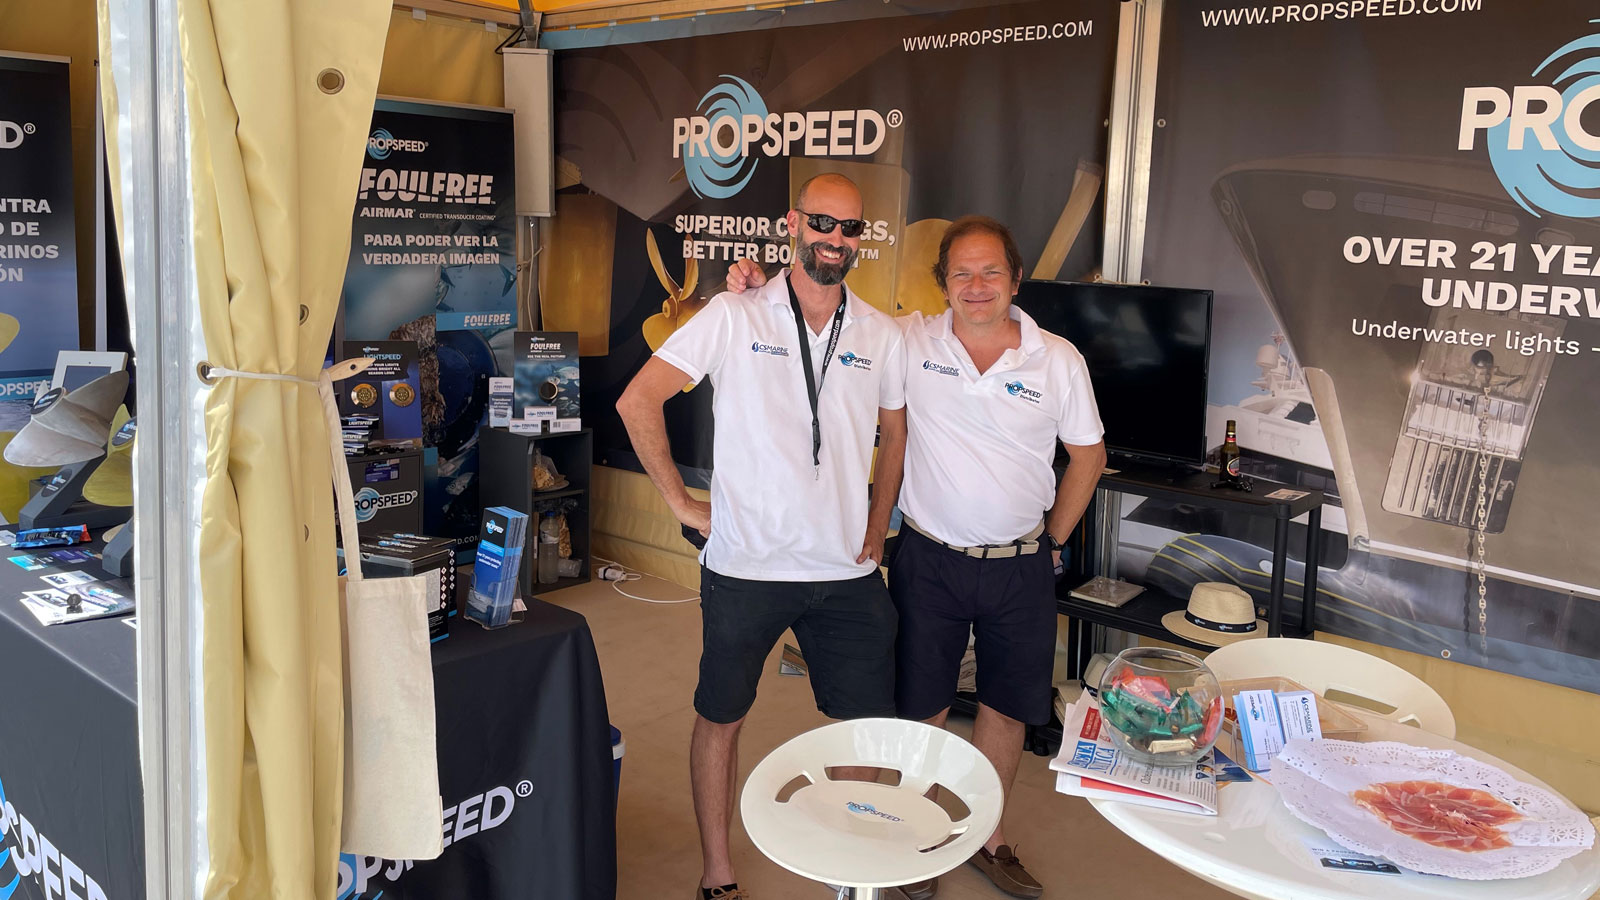 Propspeed distributor CleanSailing at Palma Superyacht Show